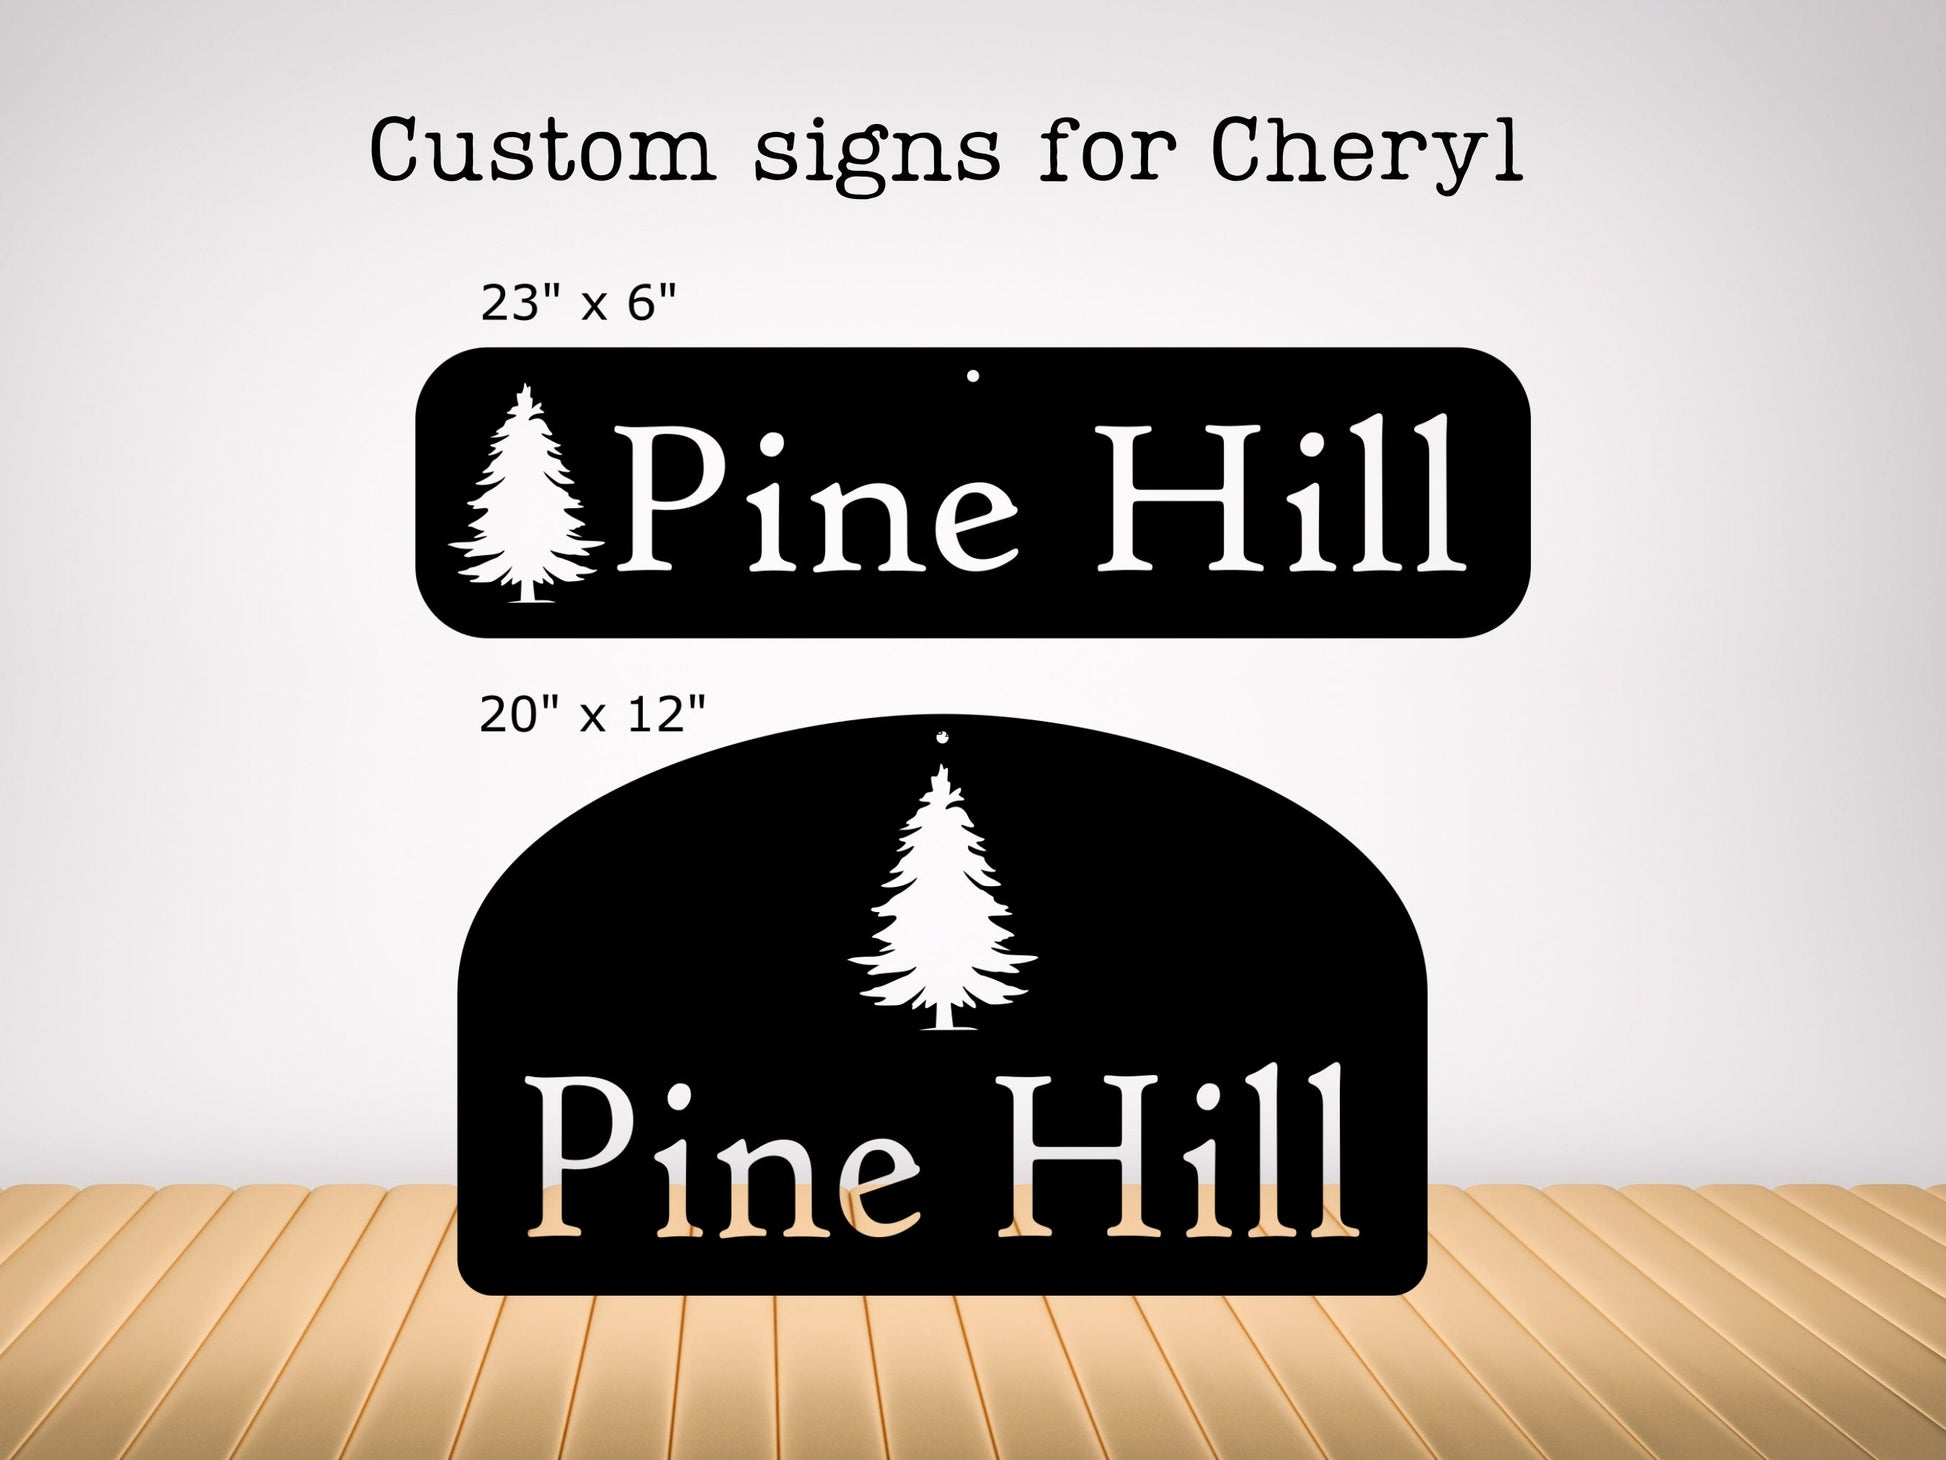 Two Custom, Personalized metal signs for Cheryl